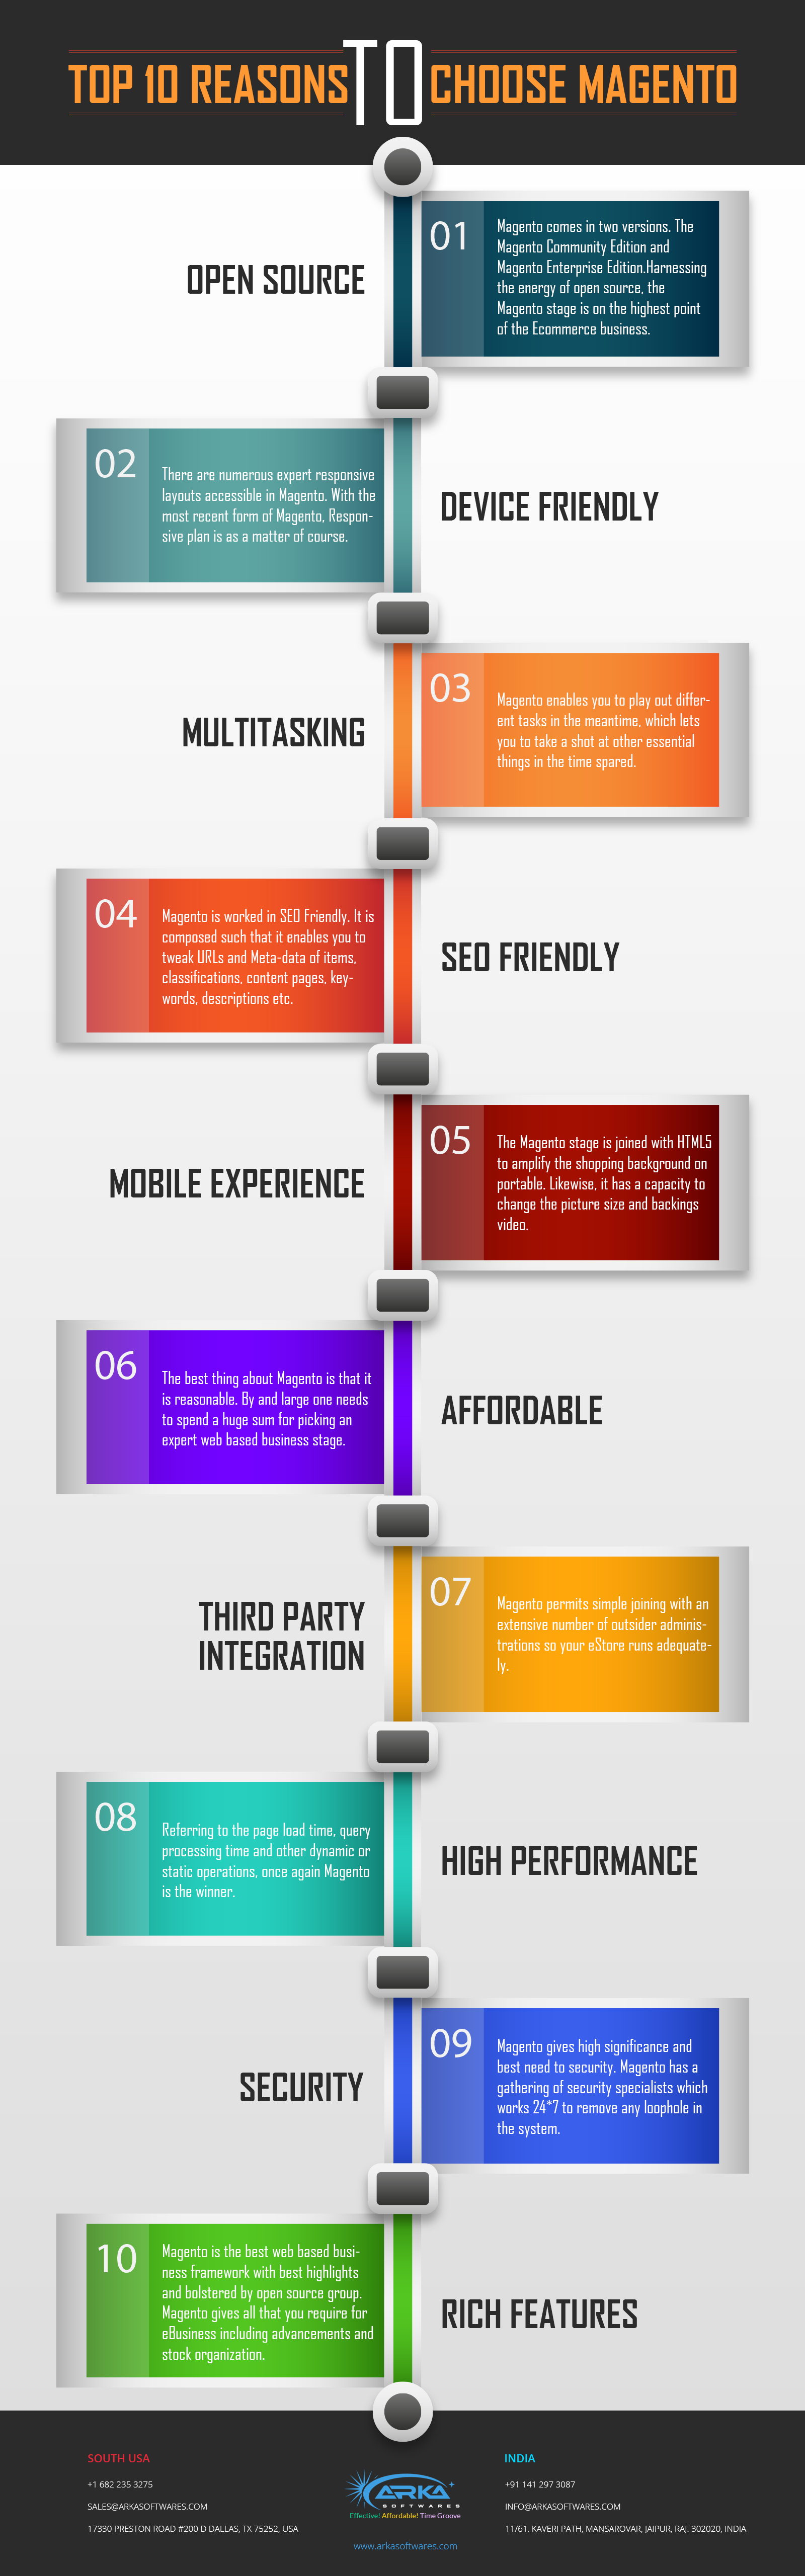 Top 10 Reasons to Choose Magento